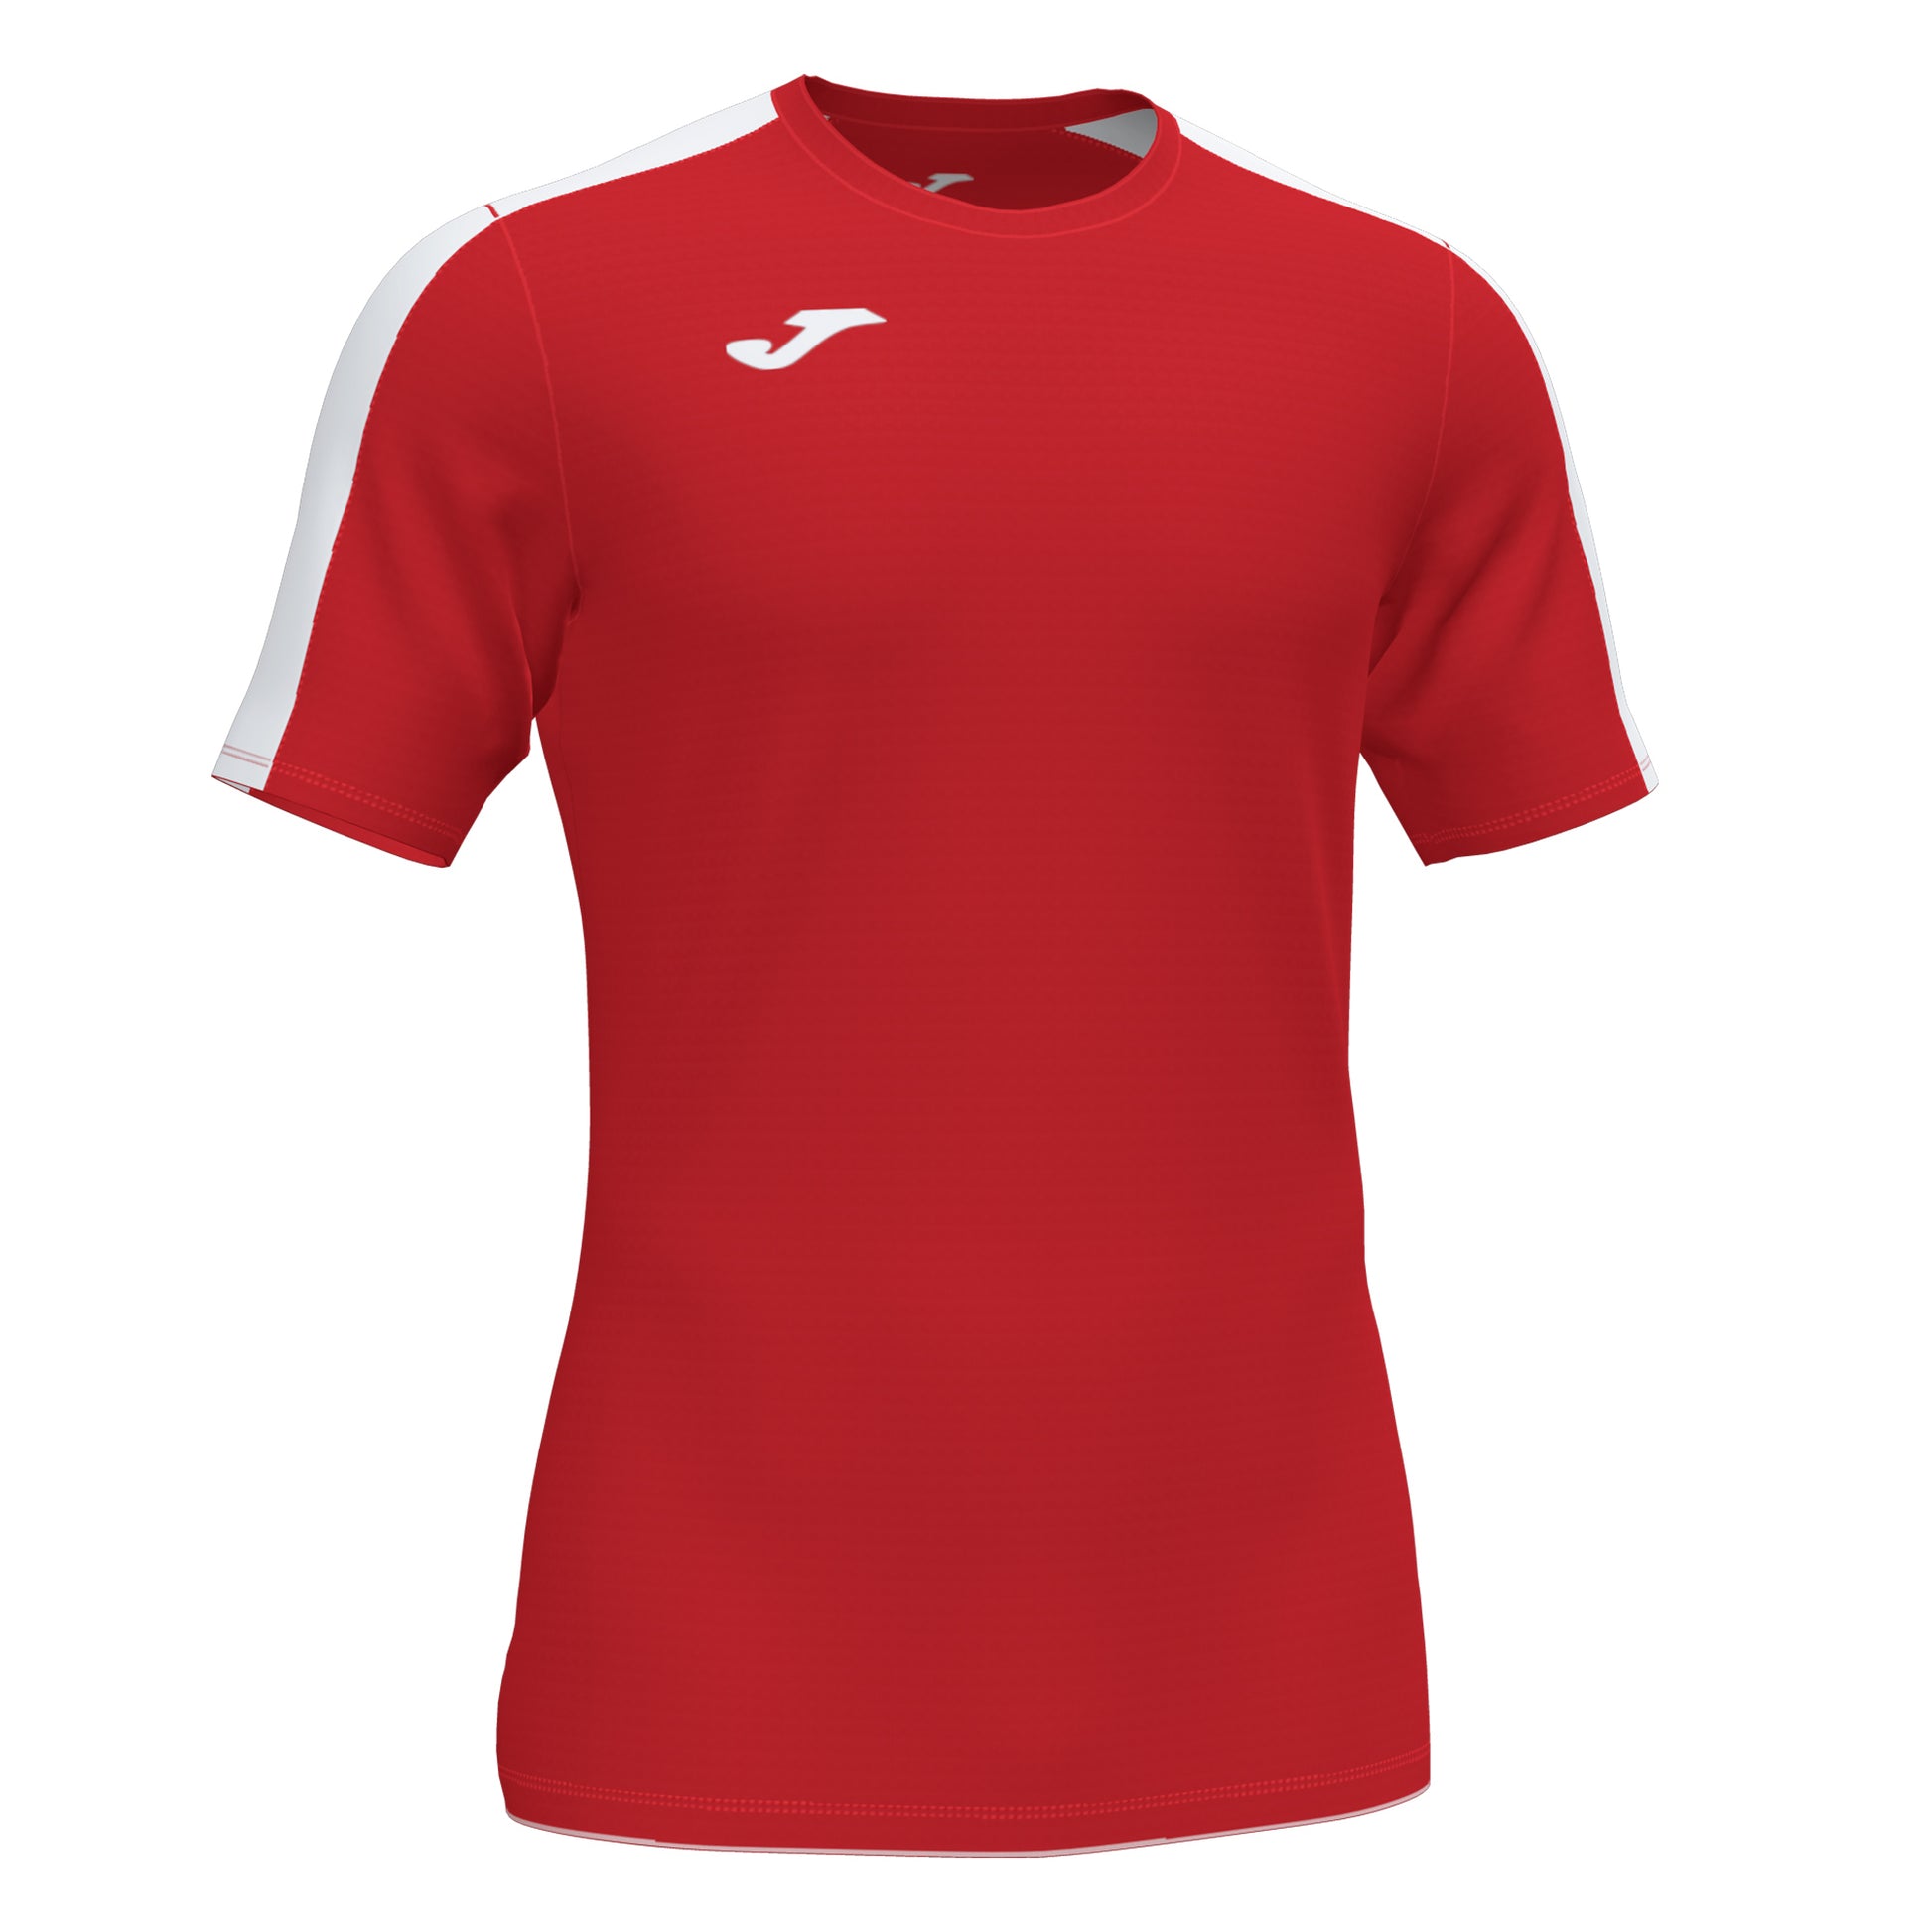 Joma Academy III Jersey-Red/White